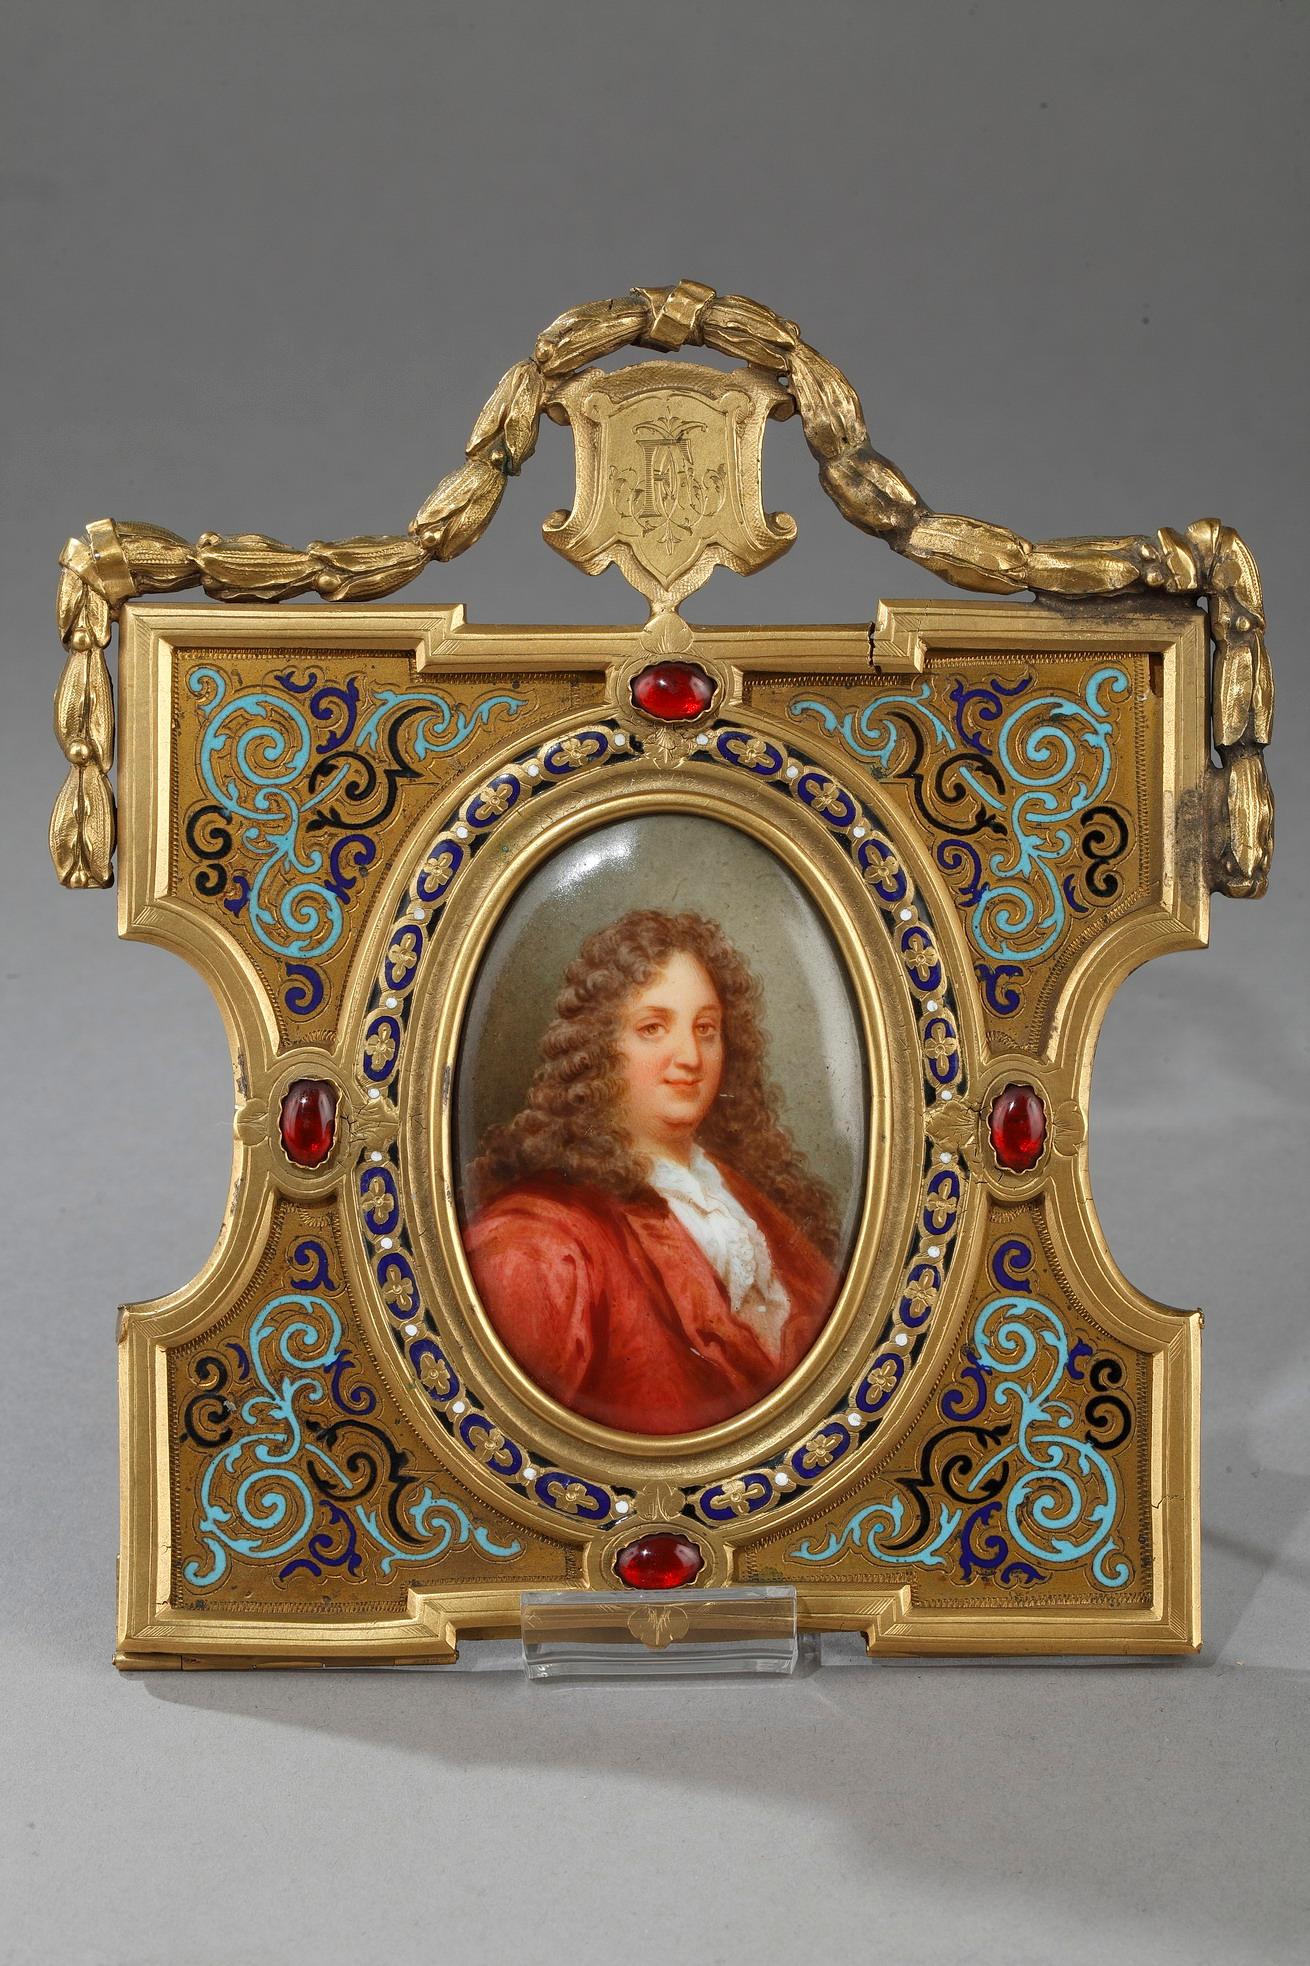 Pair of porcelain and enamelled portraits featuring a man and a woman of the 17th century. It is most likely a portrait of Louis XIV and Maria Theresa of Austria. The two porcelain medallions are set in a scalloped bronze frame. Each frame is